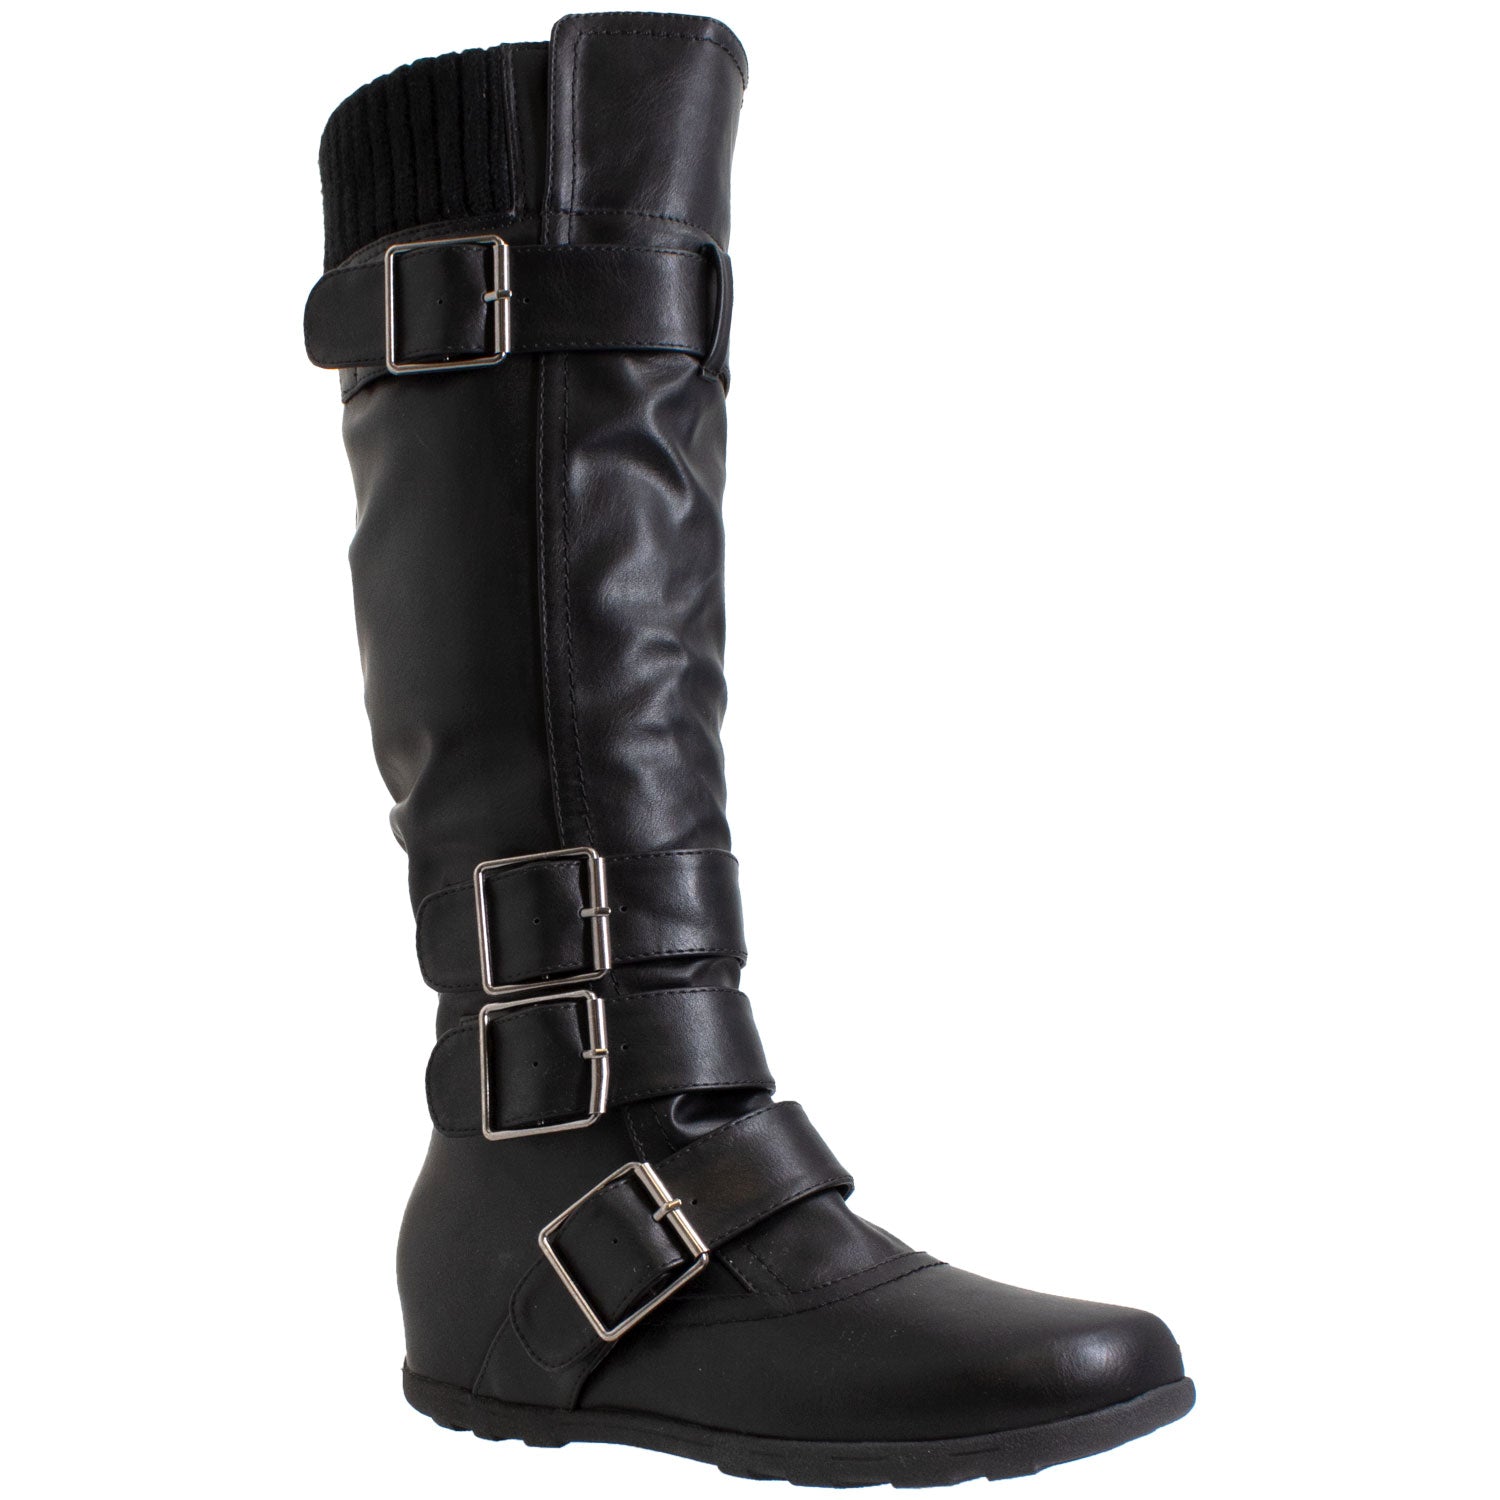 Generation Y Women's Lace Up Combat Knee High Boots